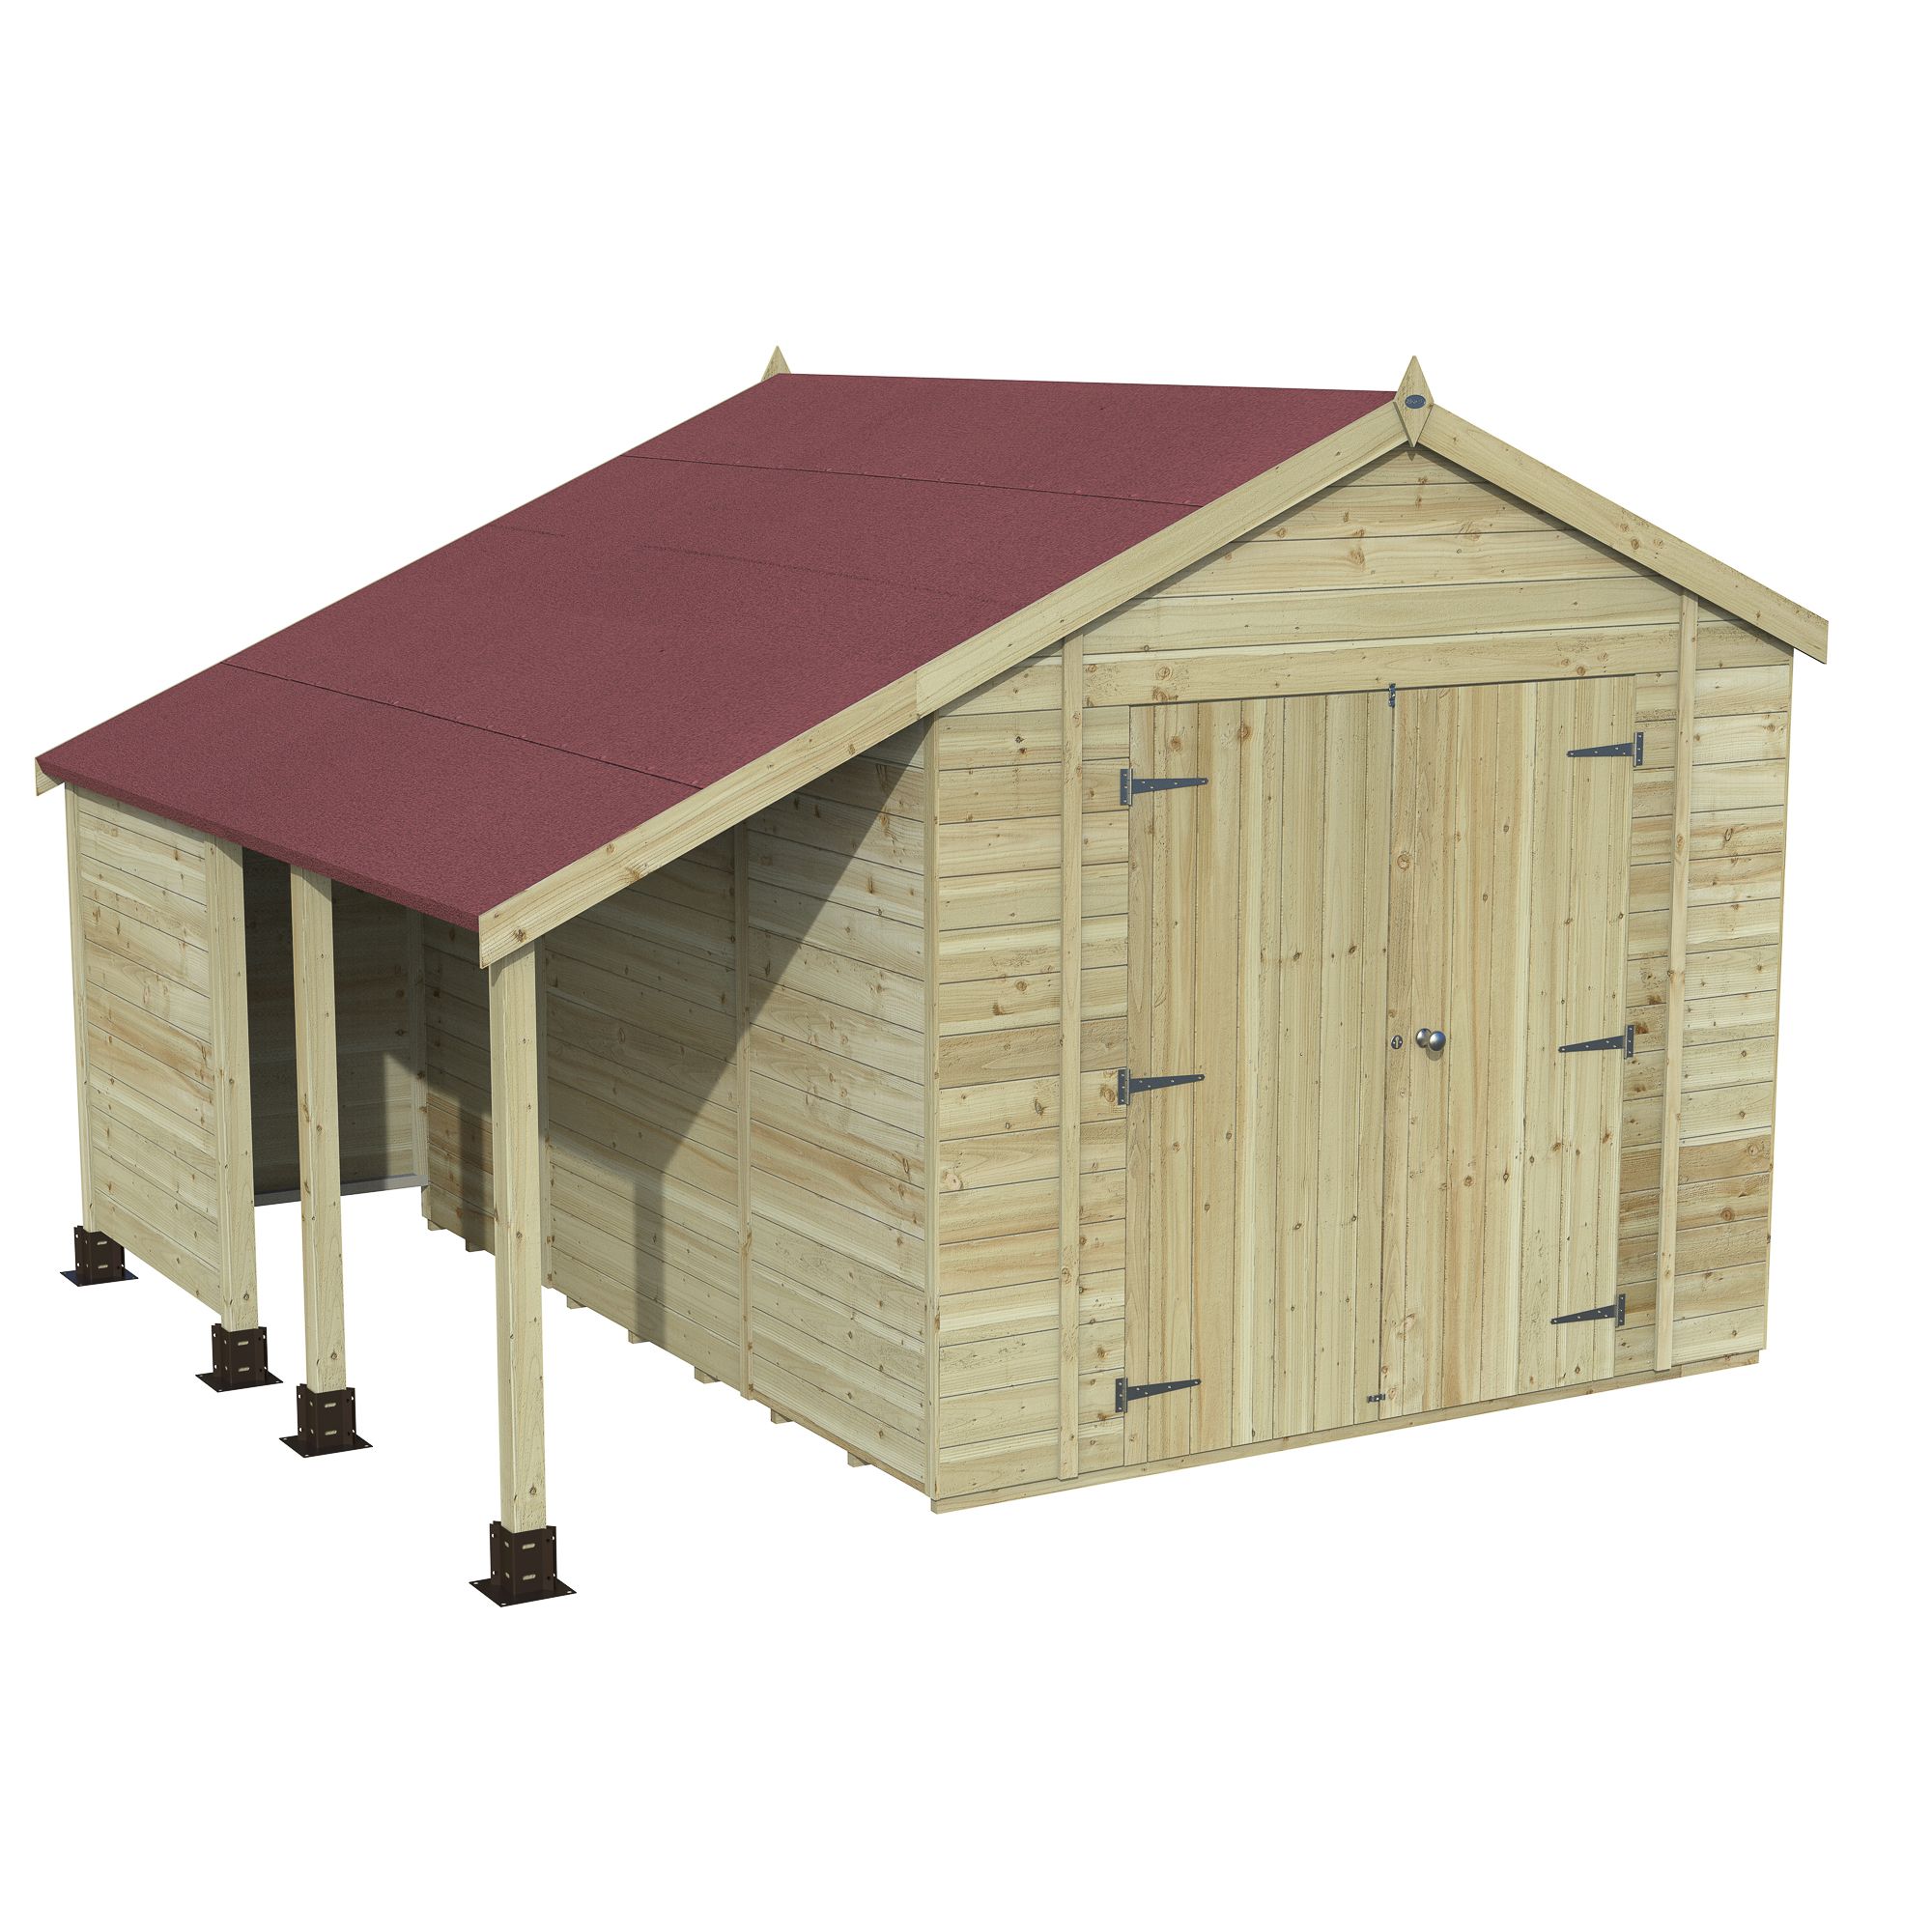 Forest Garden Timberdale log store 10x8 ft Apex Wooden 2 door Shed with floor (Base included)